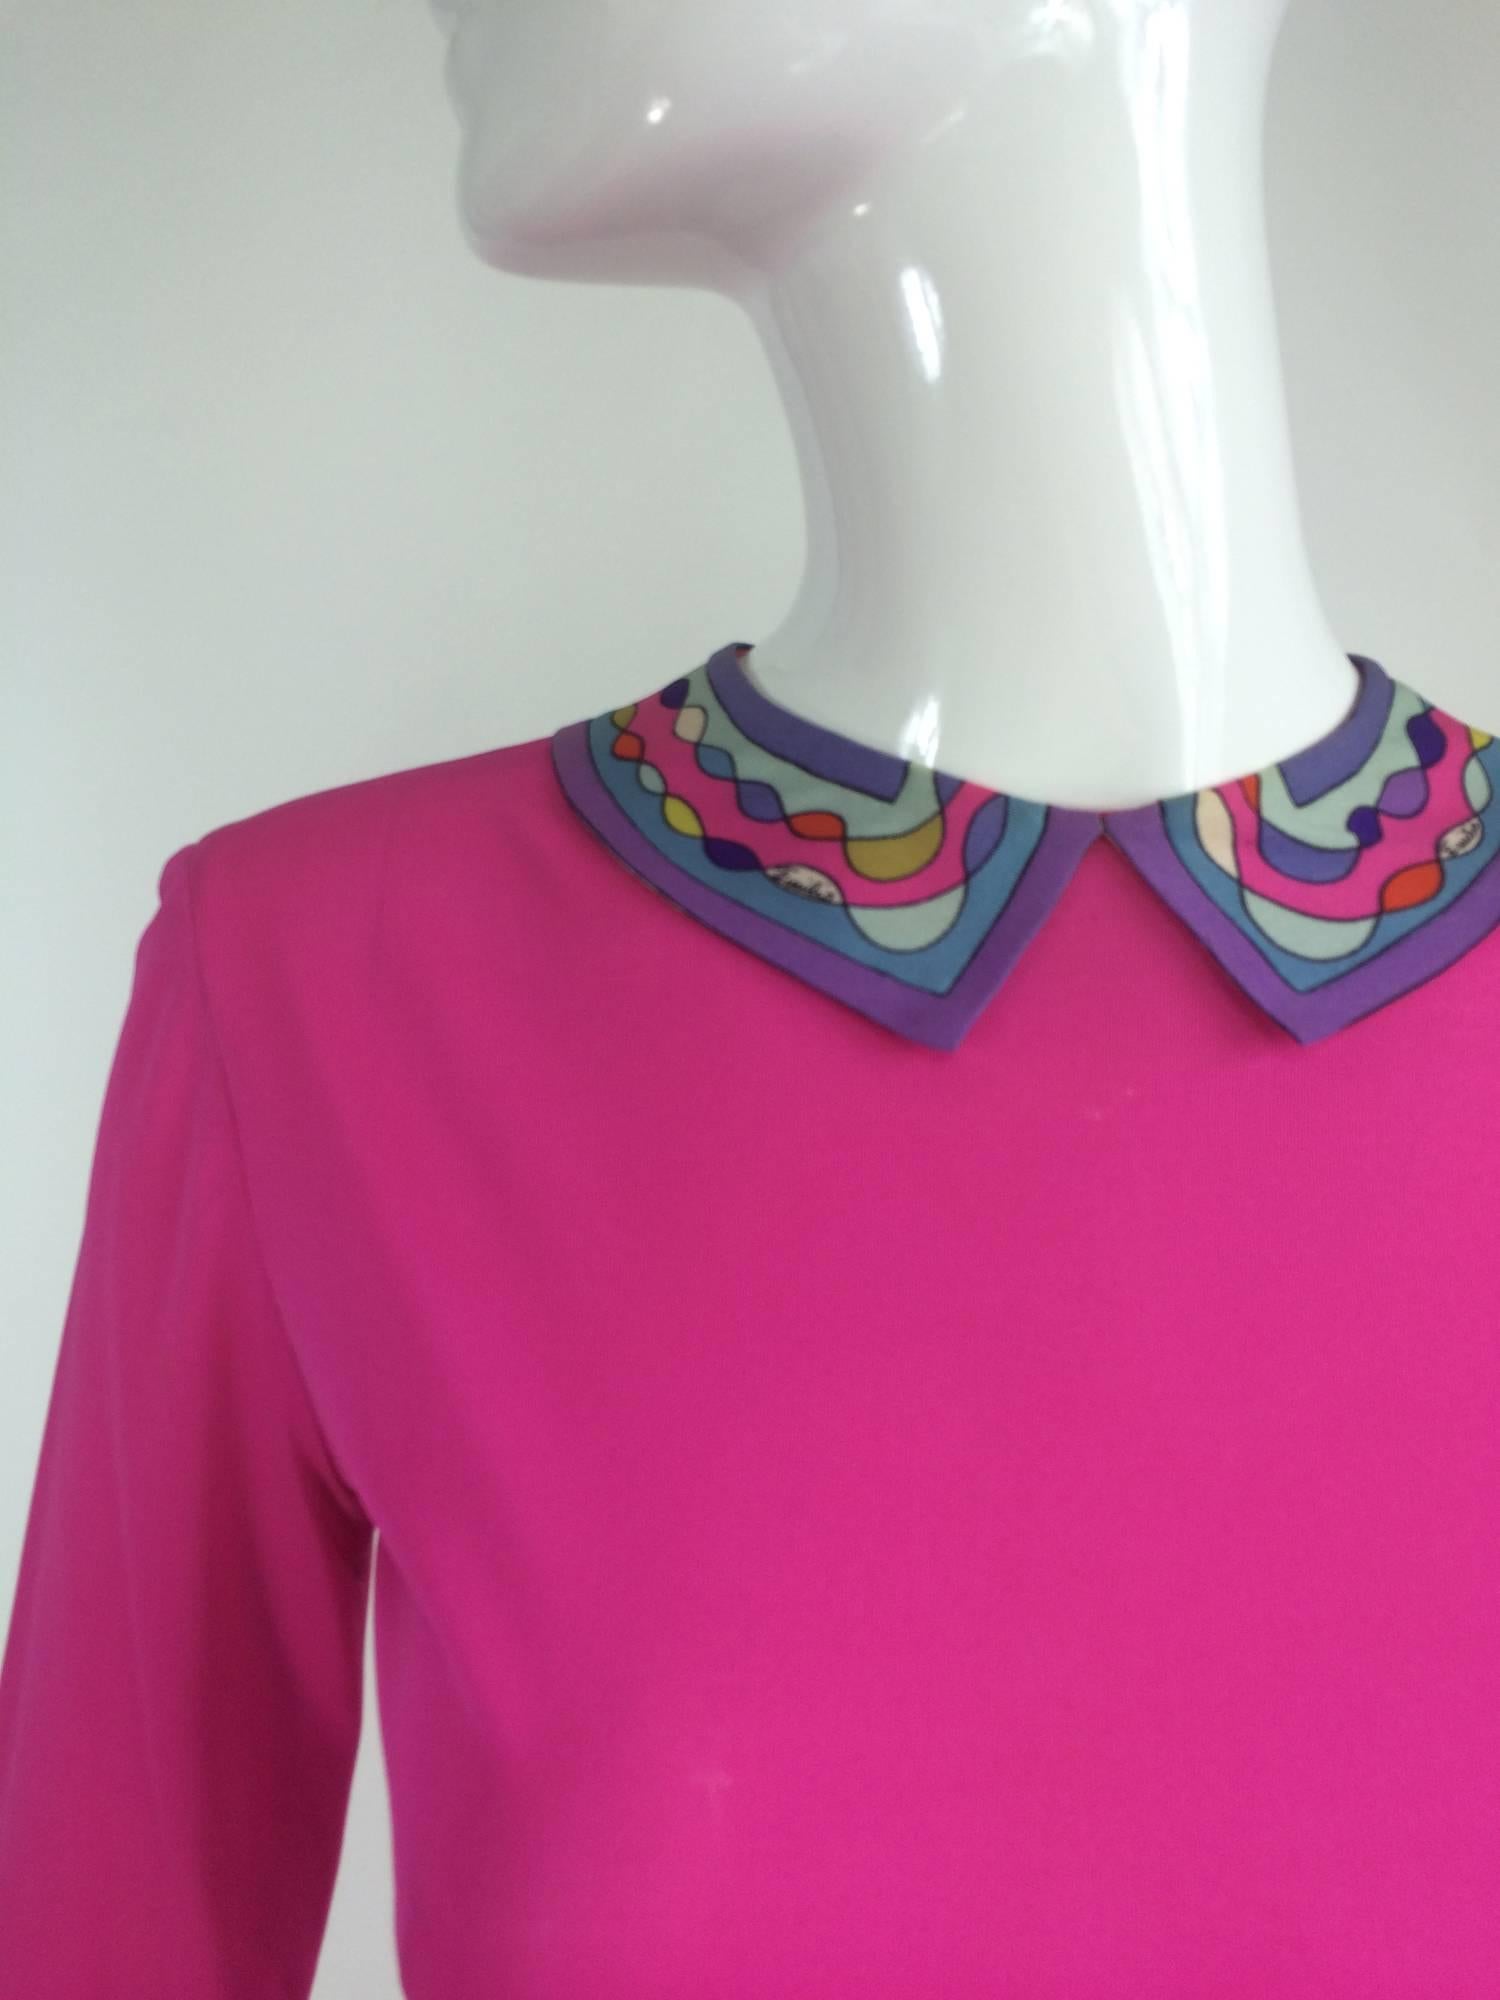 Pucci Mod silk knit dress in hot pink & classic print 1960s...Silk jersey dress has a narrow patterned collar that pops against the hot pink bodice, which is fitted through the bodice to the hip top, long tapered sleeves...The skirt has a banded hip